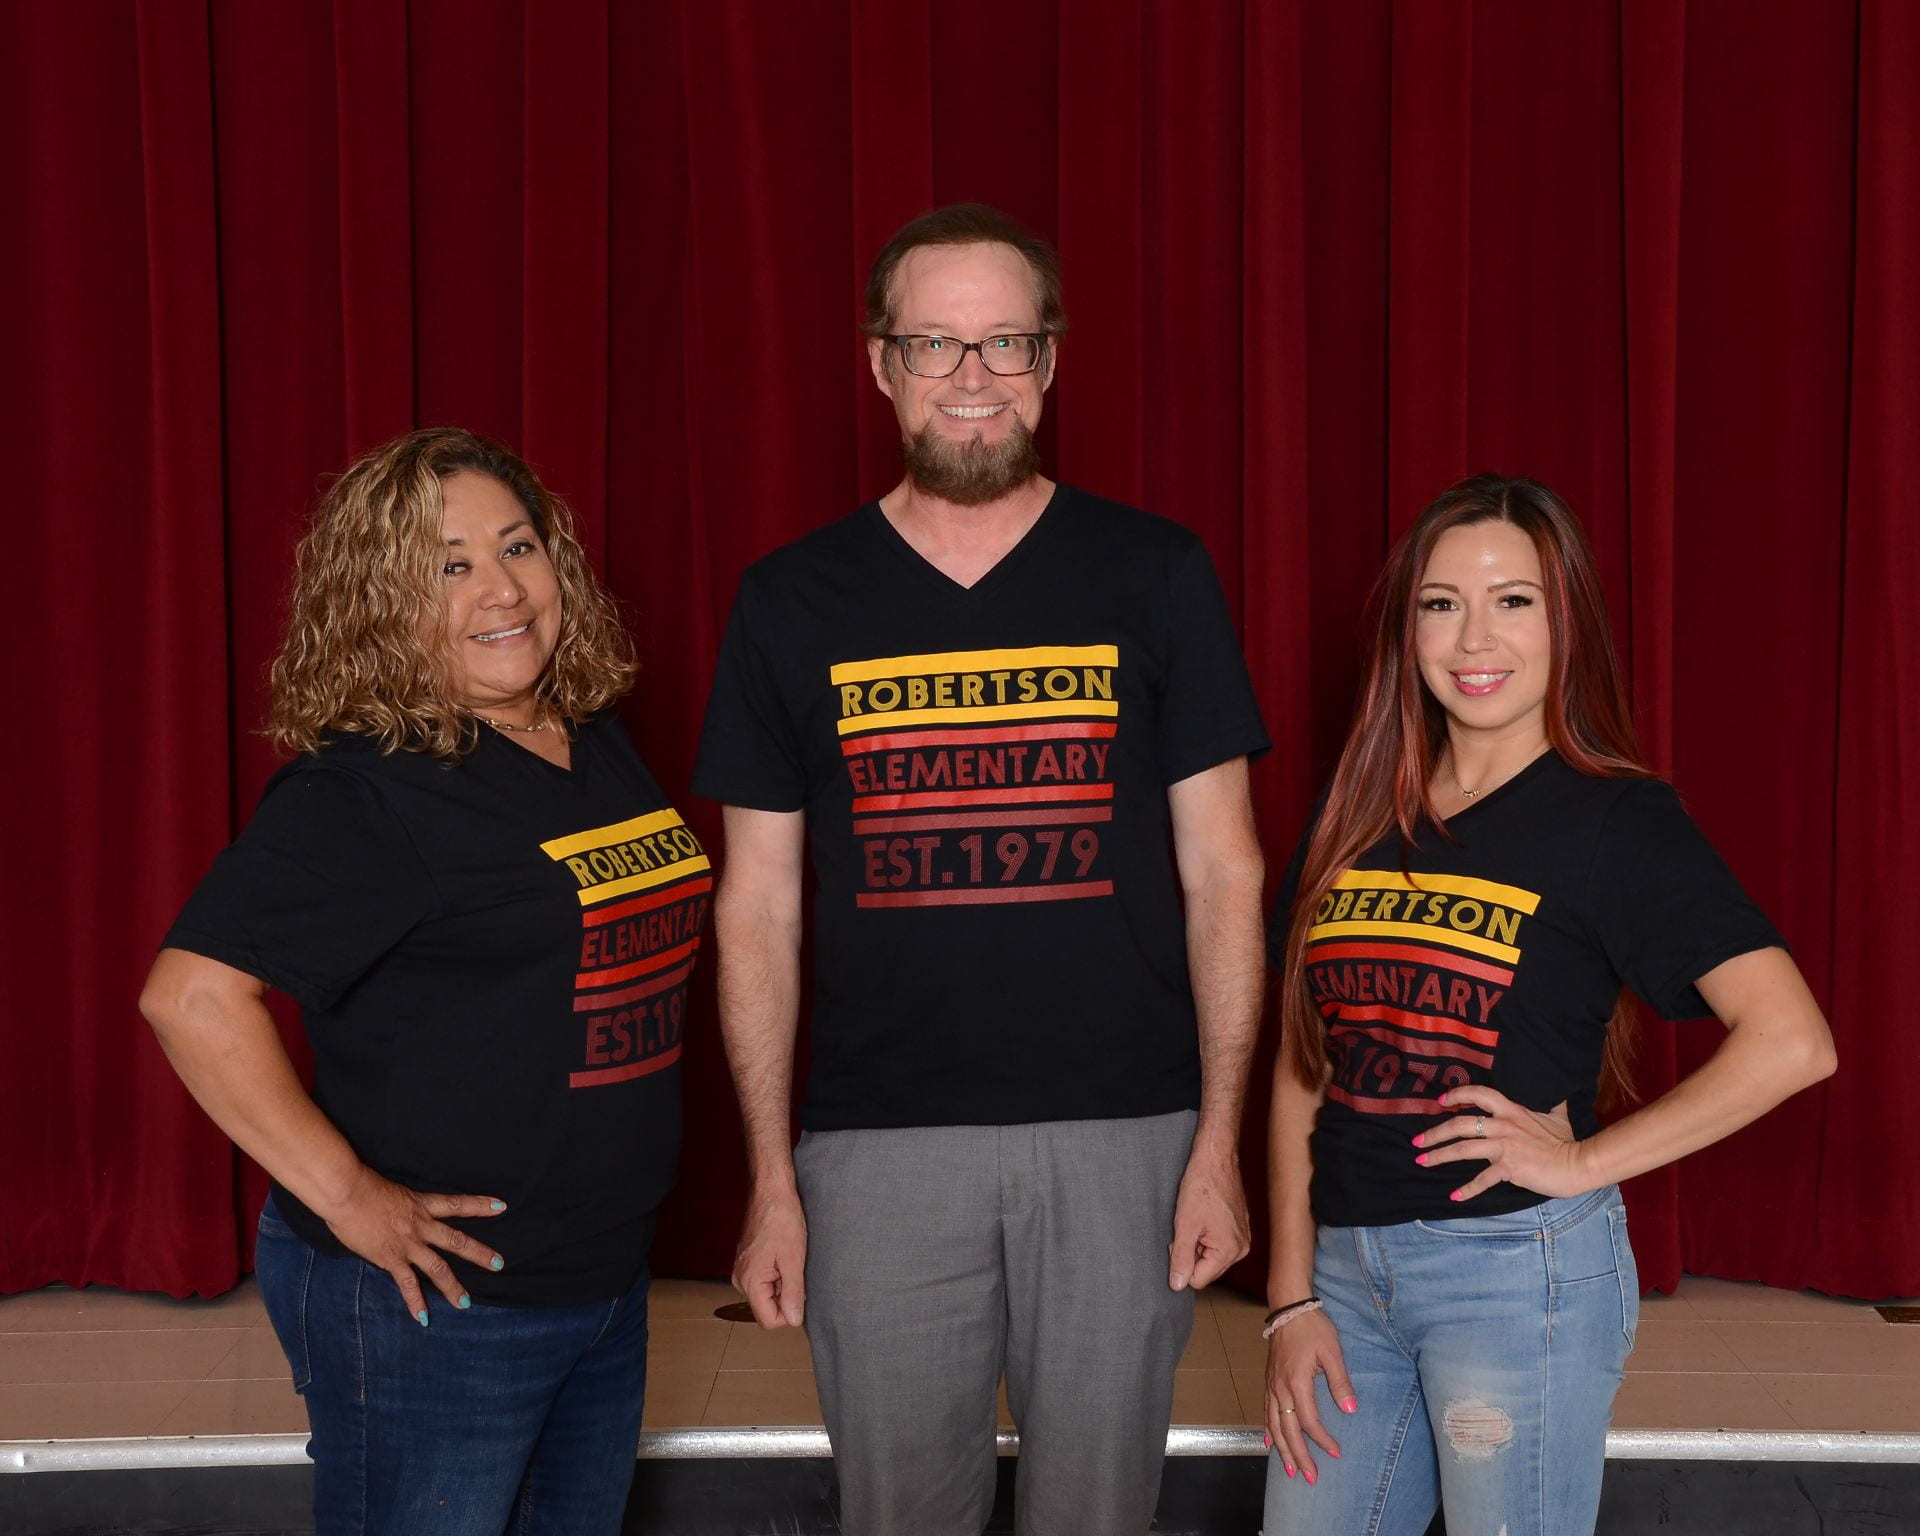 (3) Fourth grade team teachers wearing school shirts, standing in front of a maroon stage curtain